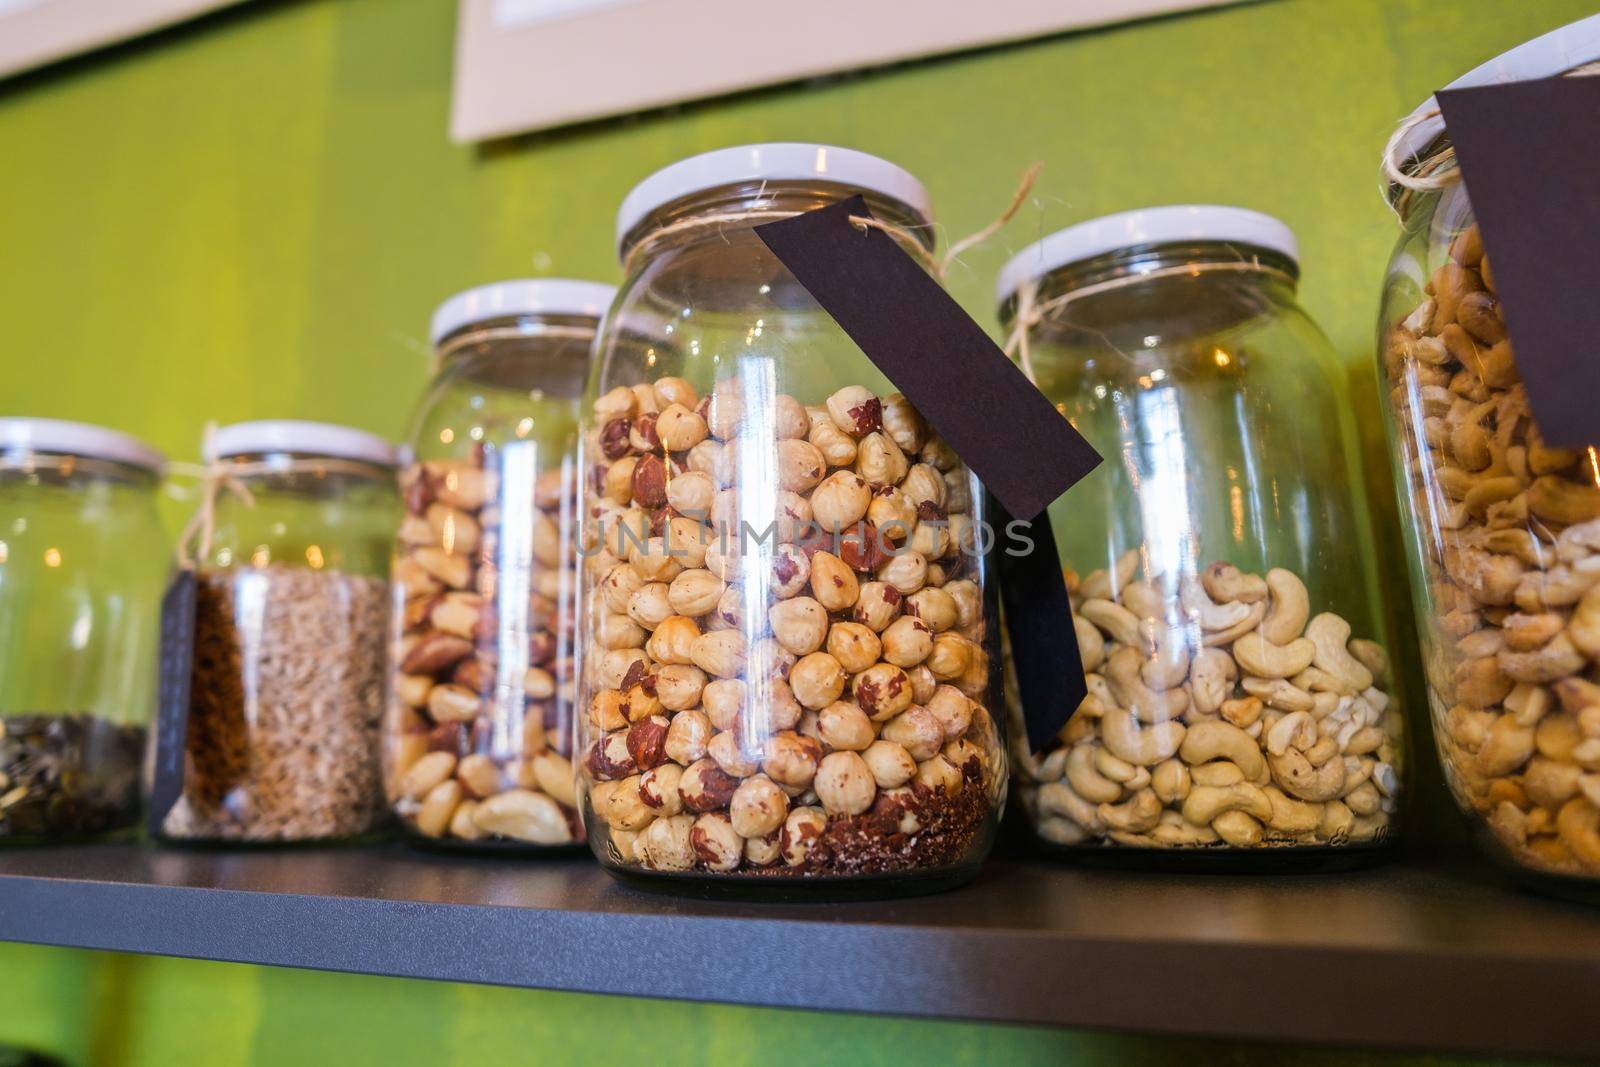 Close up image of jars with almond and other seeds in vegan food shop.